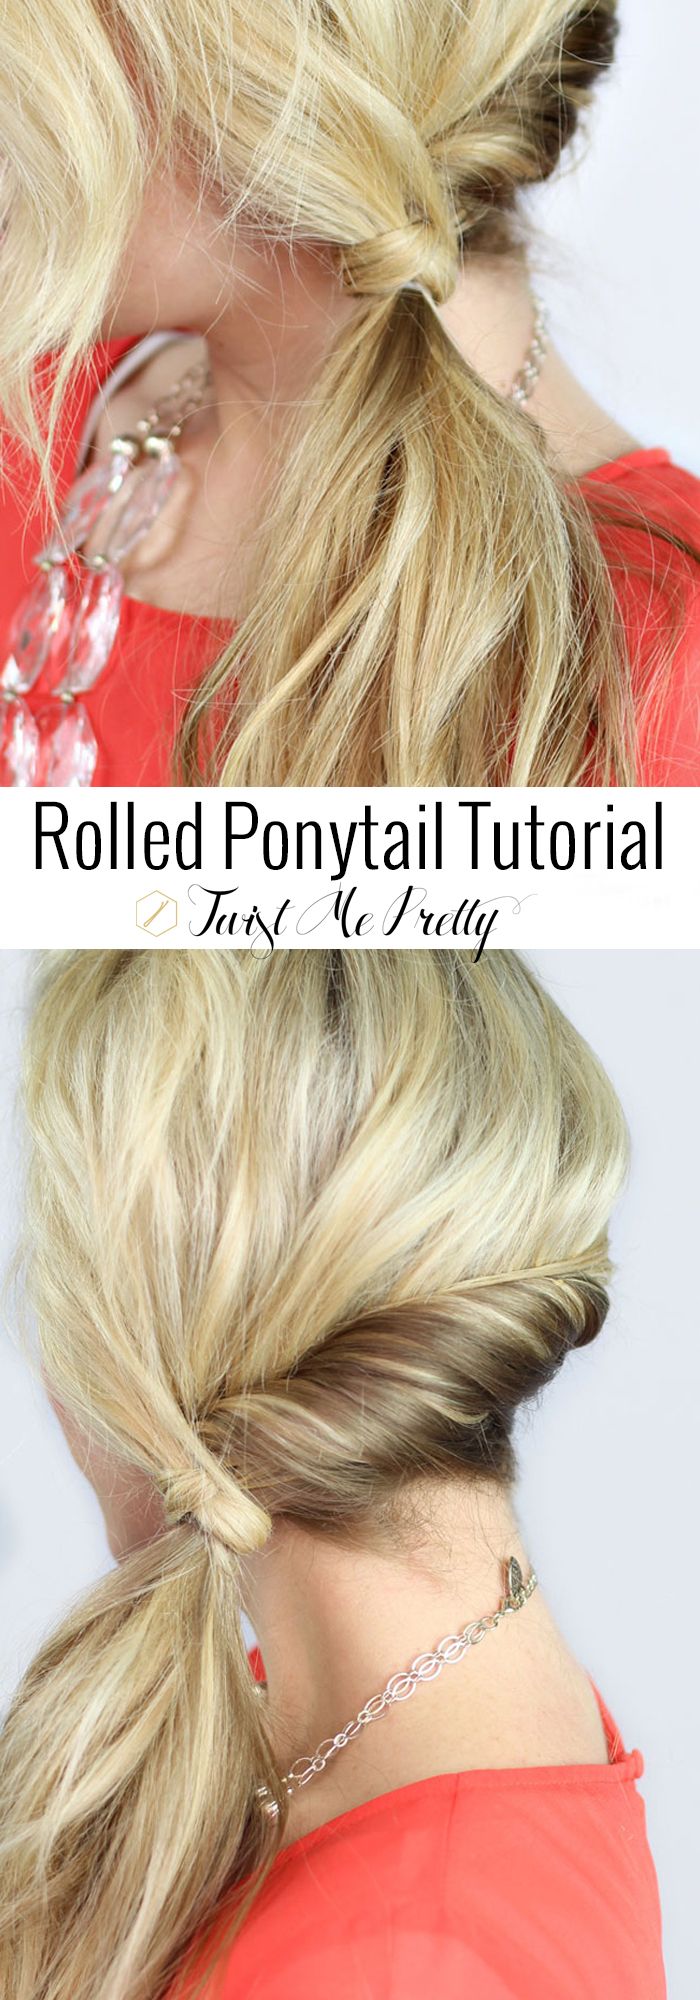 Side Ponytail Hairstyle Tutorial